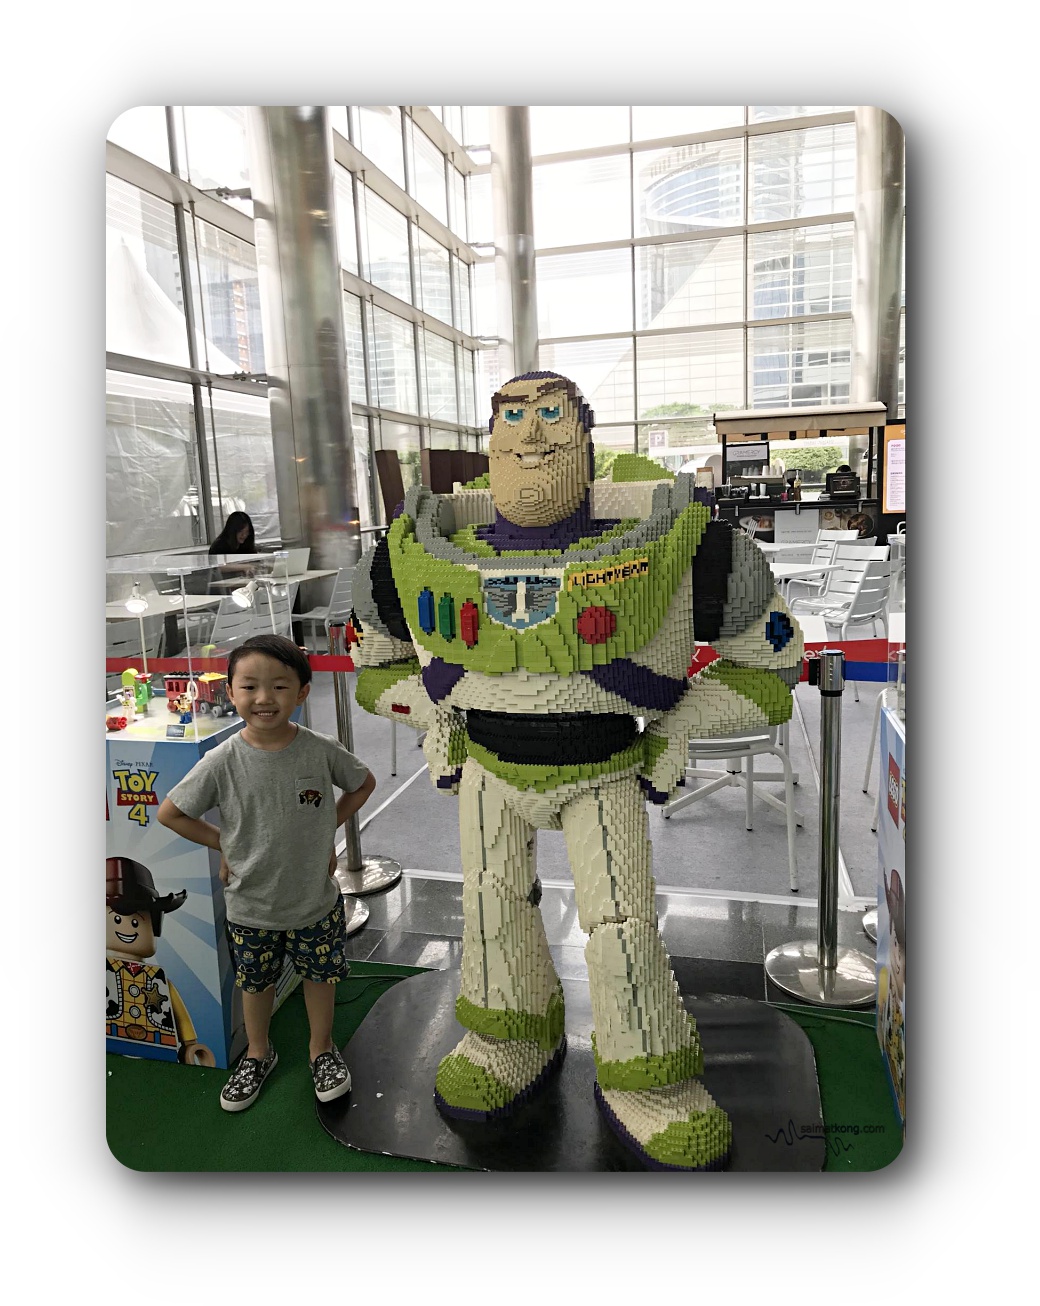 Seoul Trip 2019 Awesome Summer in Seoul - Lego Fair at COEX Mall and Aiden saw his favorite buzz lightyear from Toy Story. 